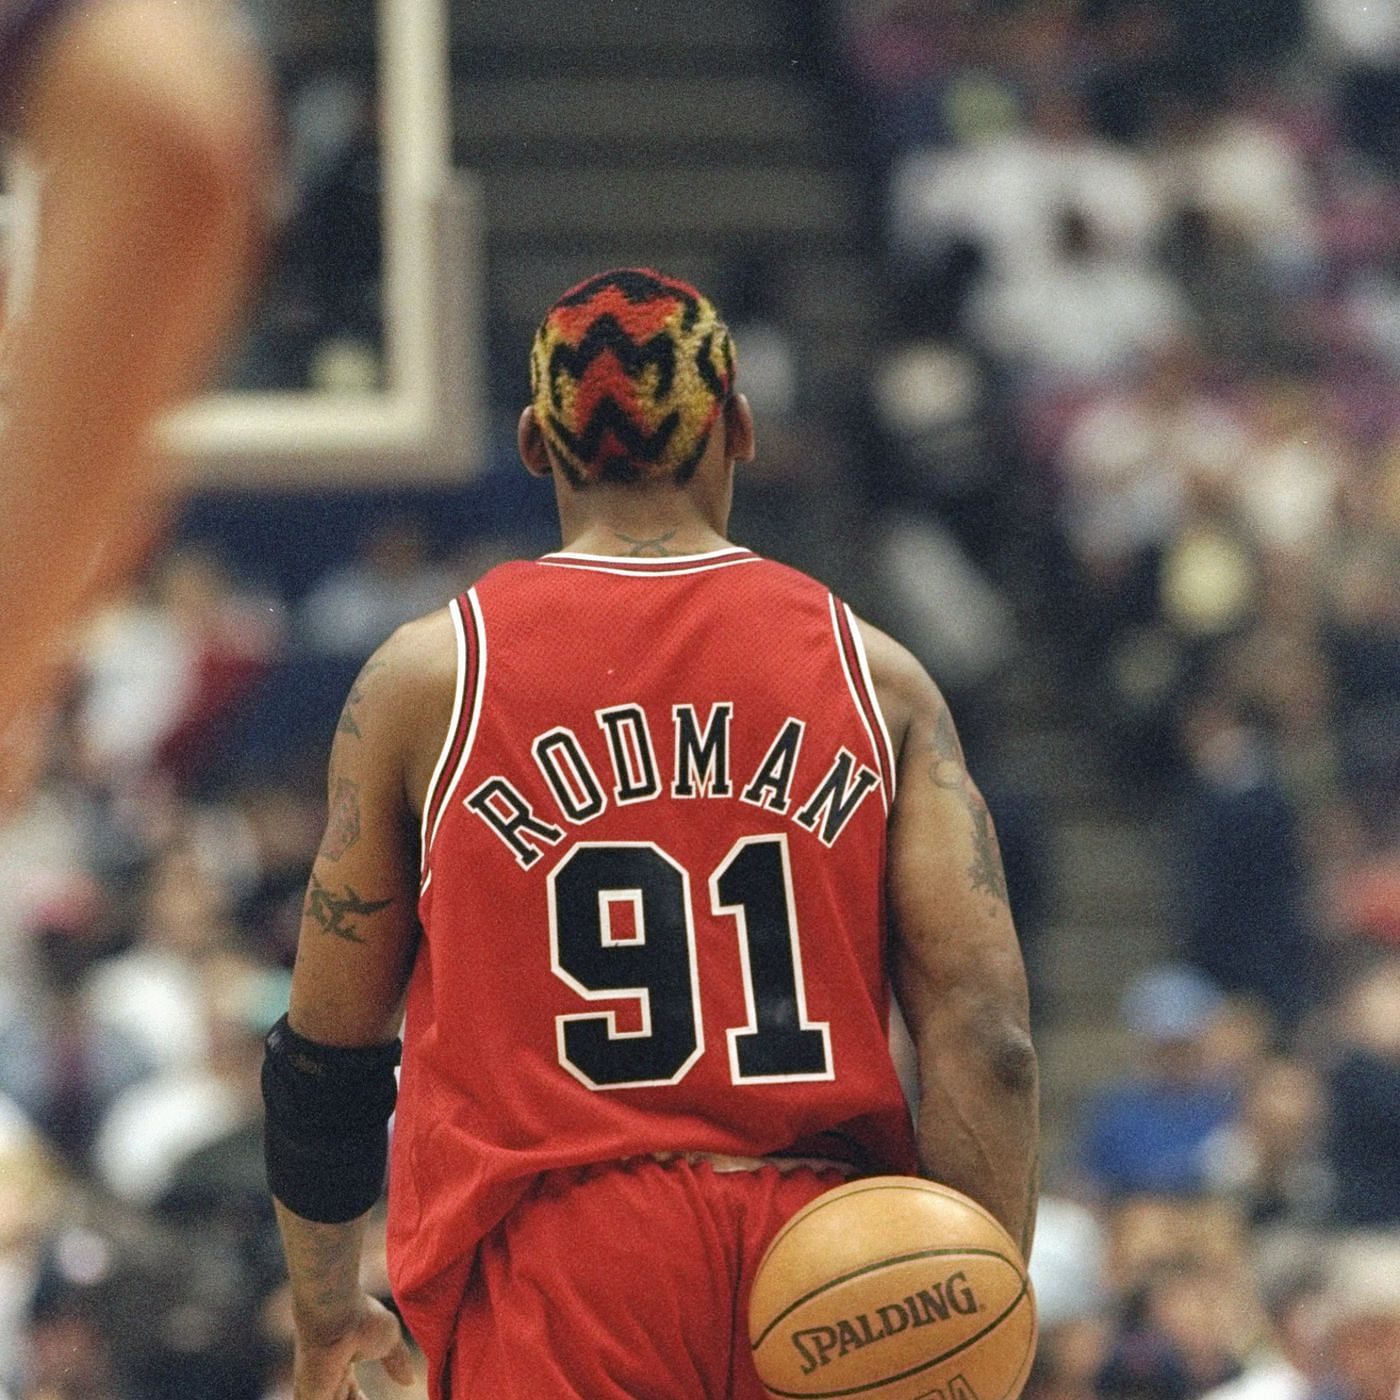 Top 5 Dennis Rodman quotes which signify his nickname as The Worm